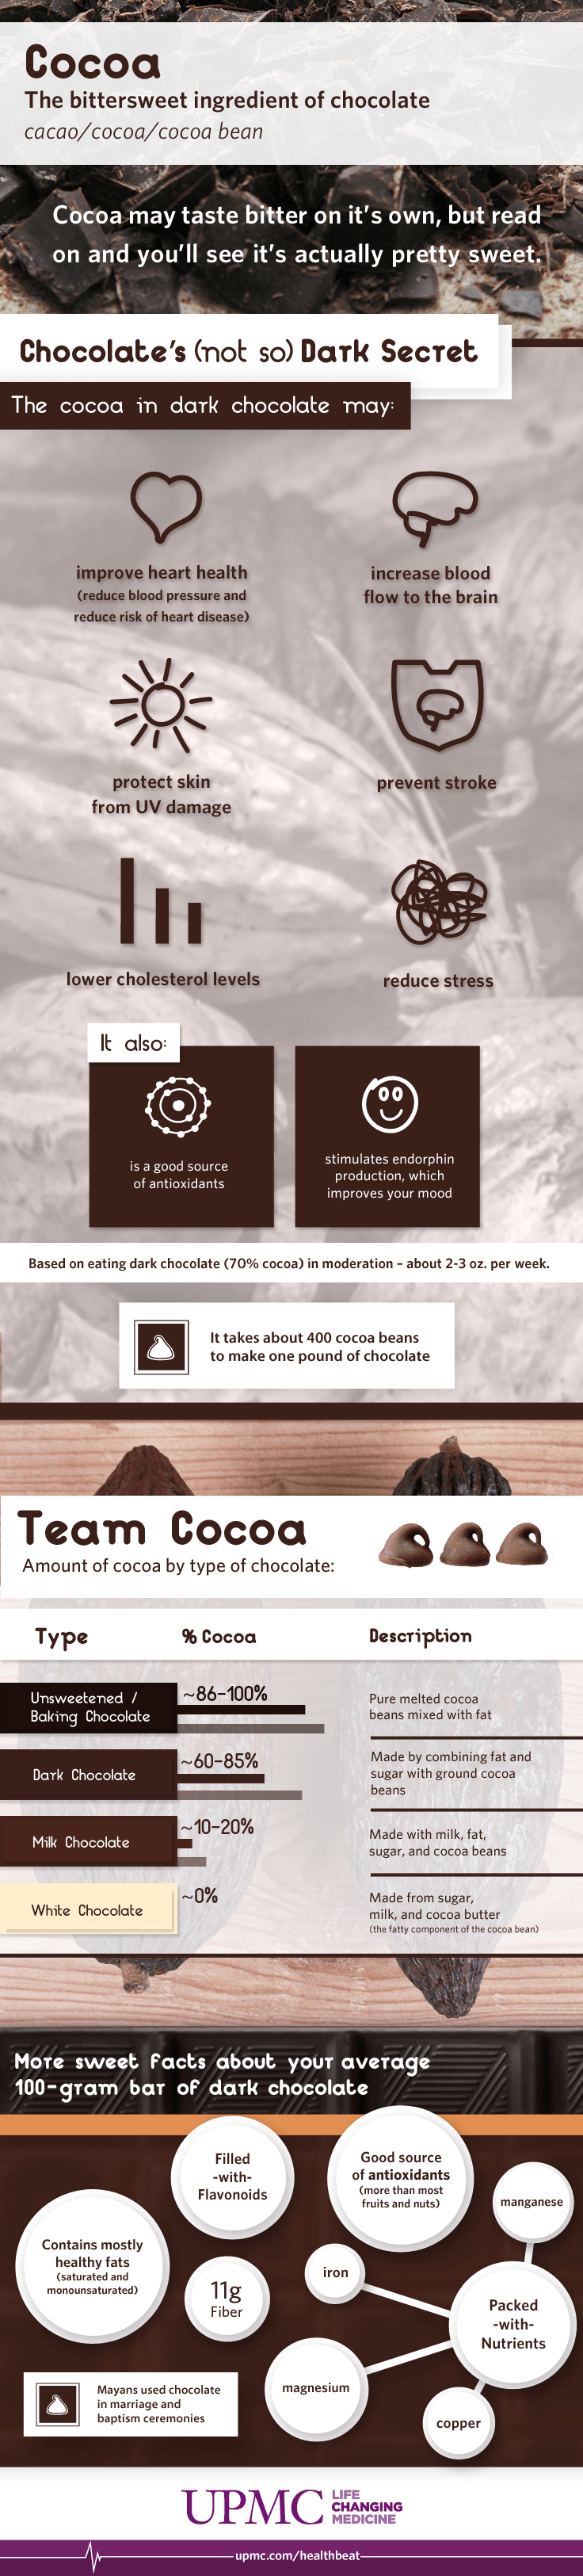 Cocoa, the main ingredient in chocolate, has many physical and mental health benefits.